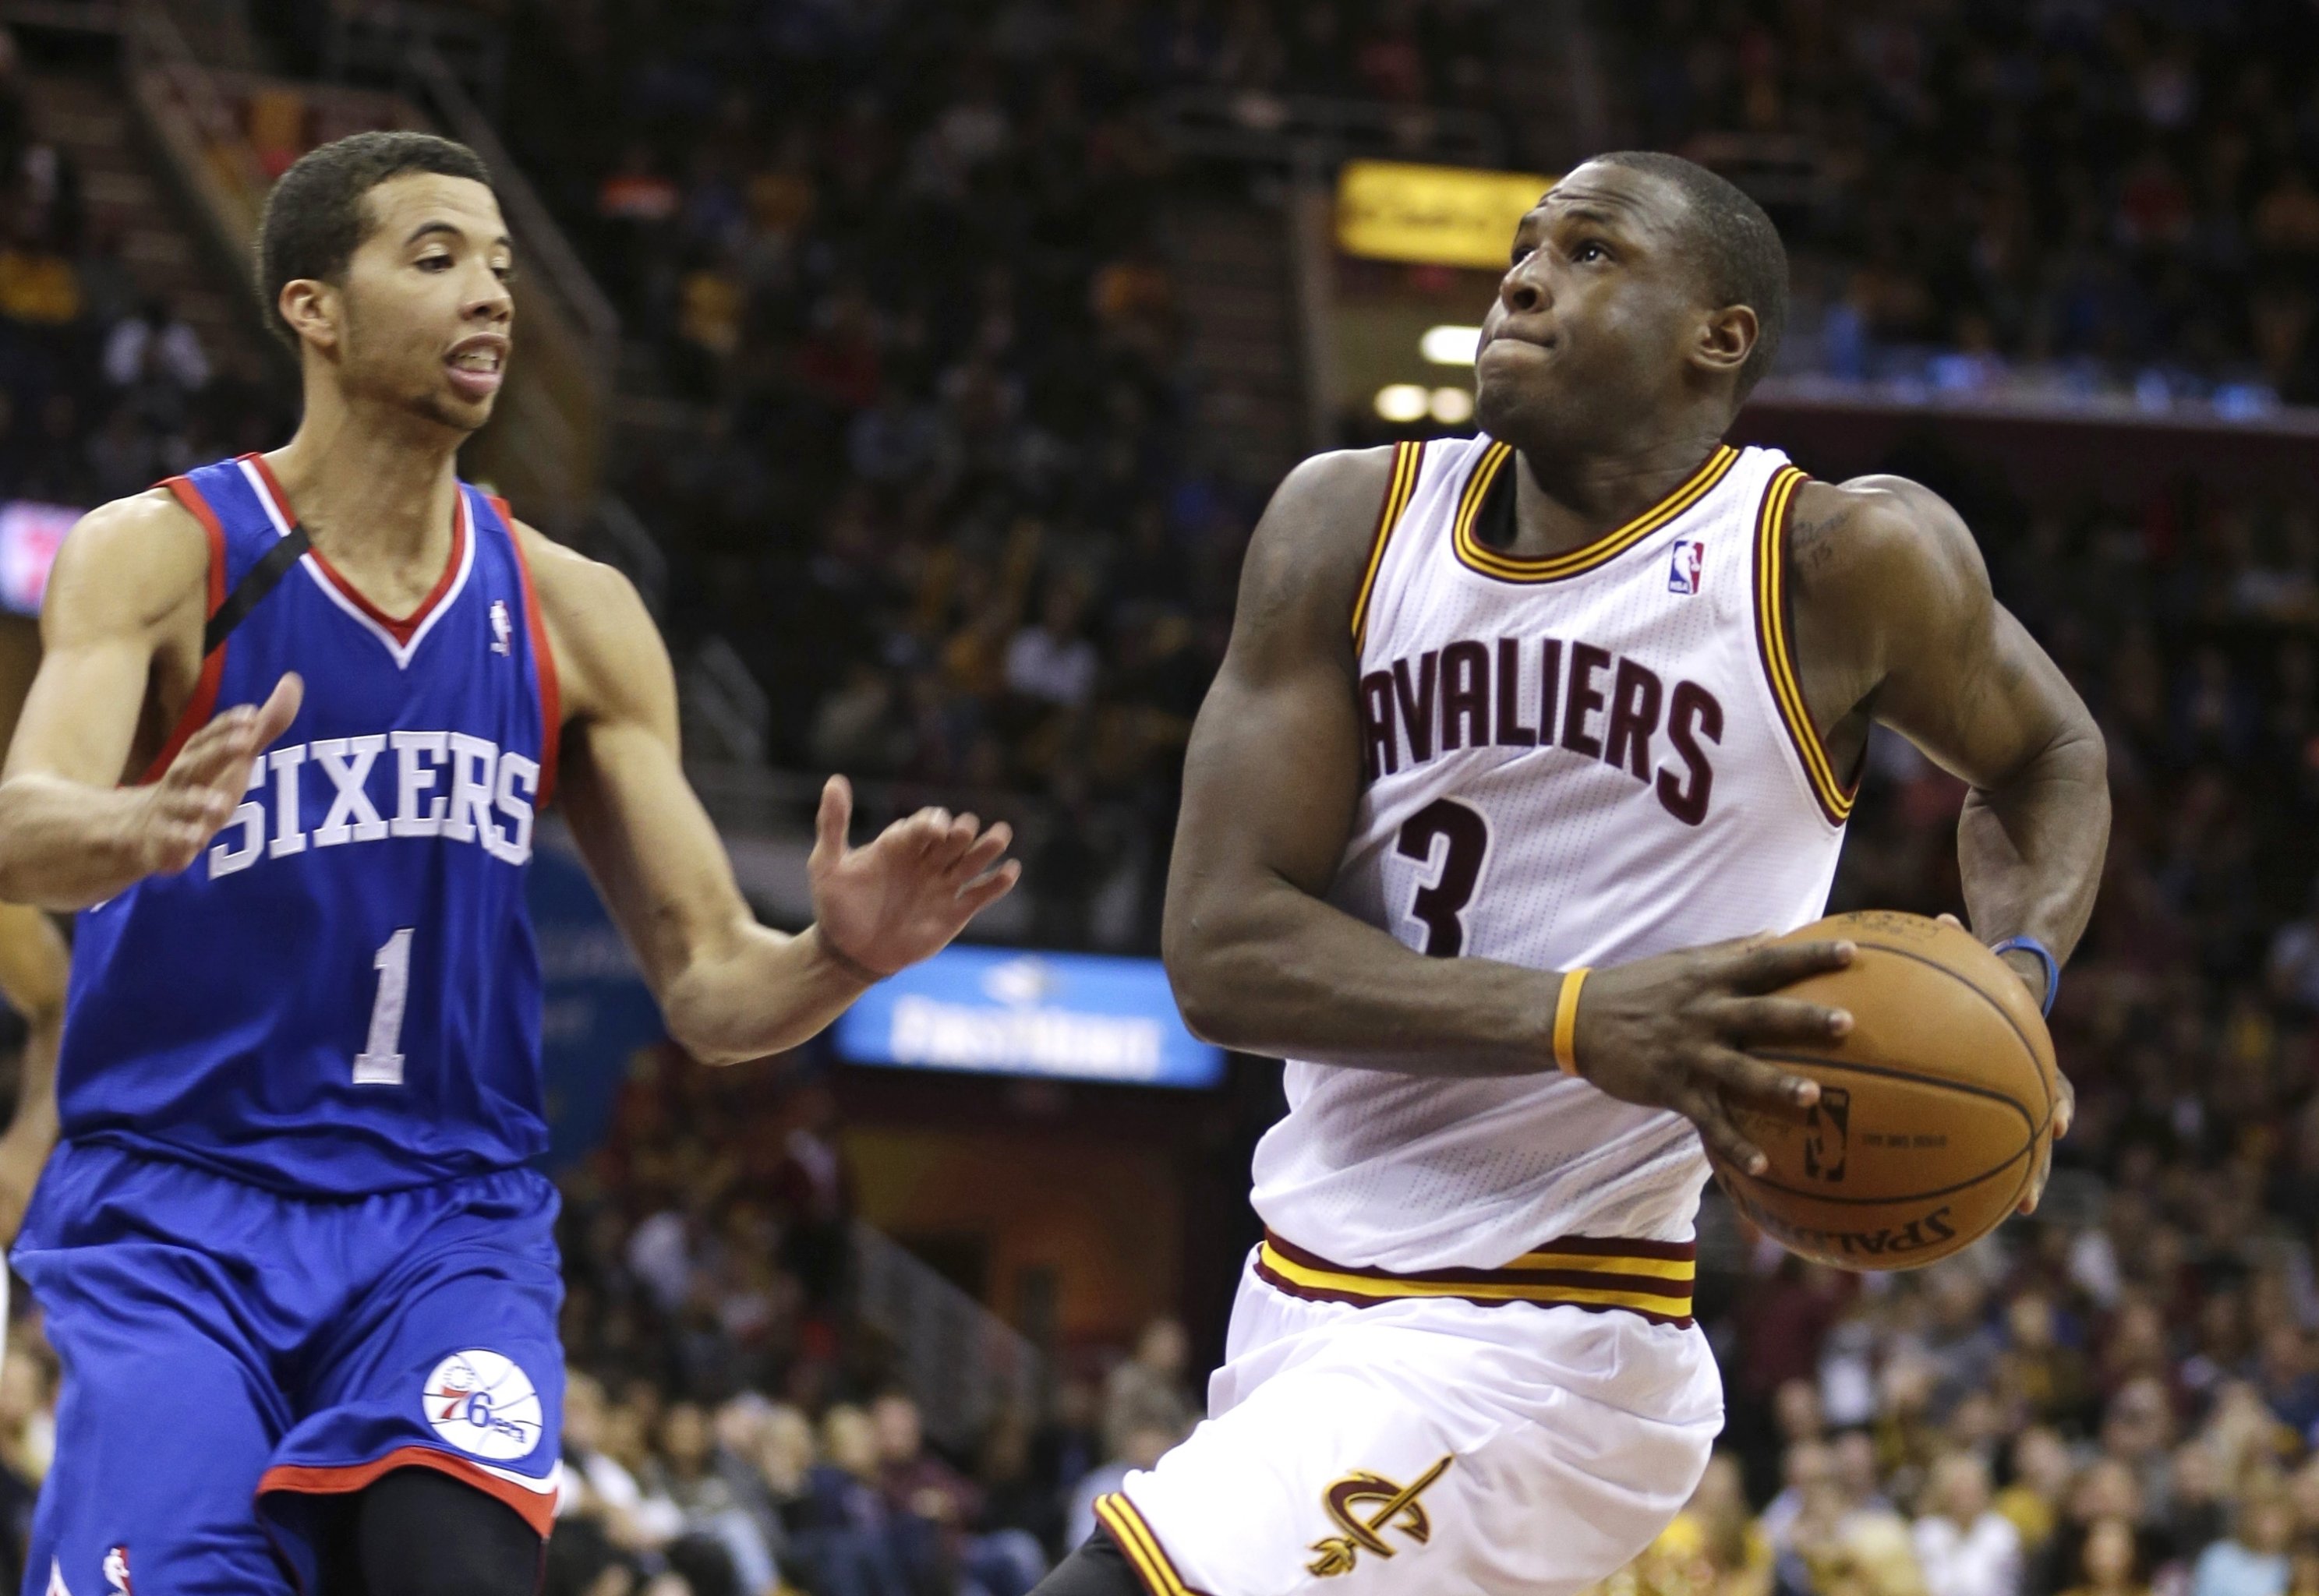 A hidden free agency gem? Getting to know Sixers PG Trey Burke